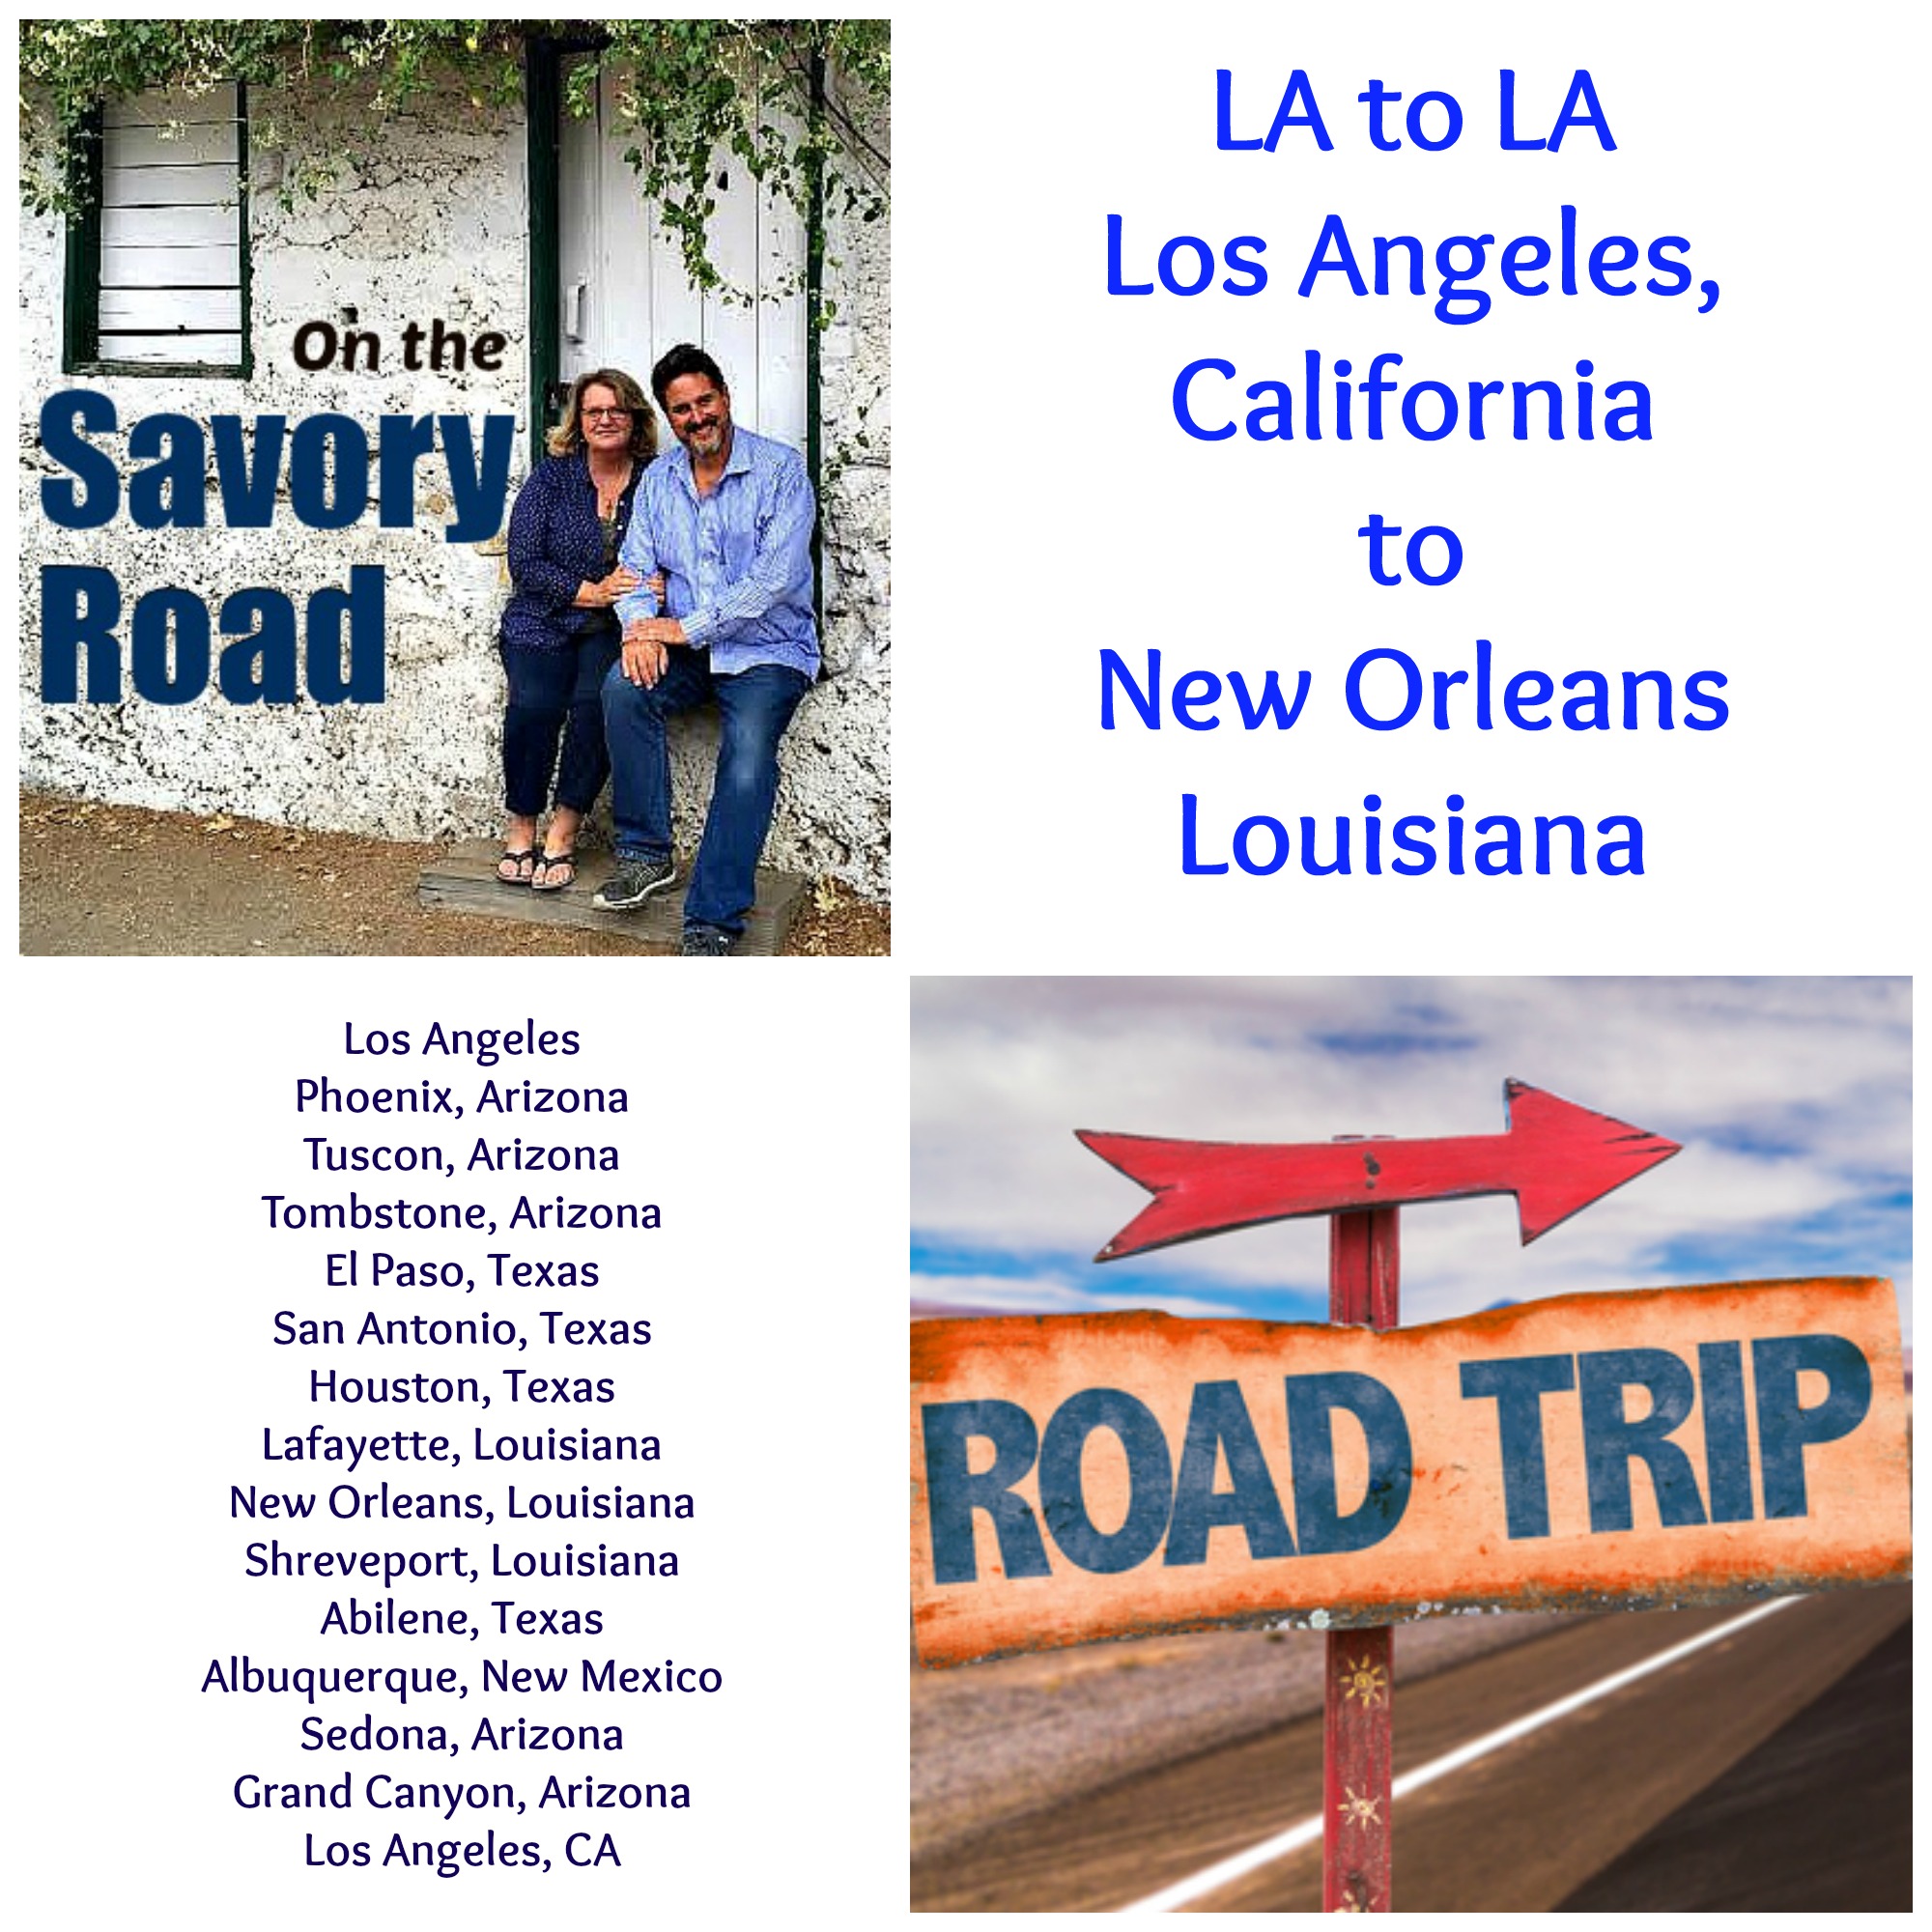 LA to LA Road Trip, starting 12/18/15, Los Angeles to New Orleans.